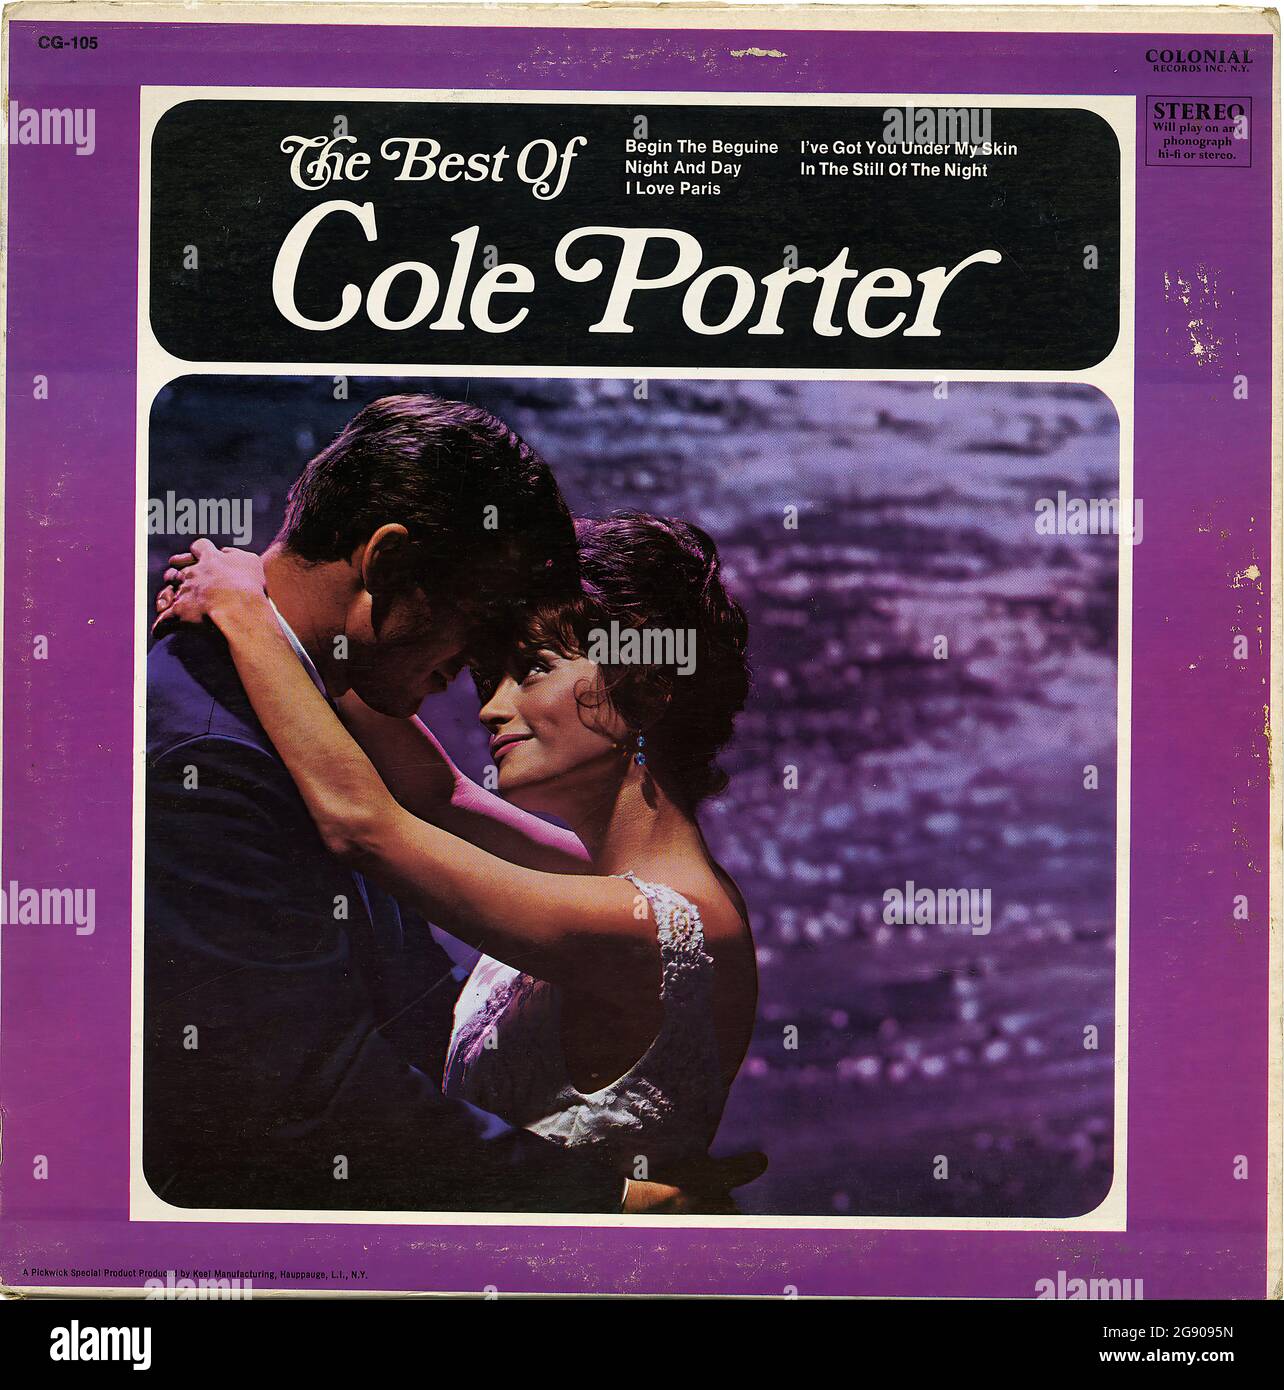 The Best Of Cole Porter -  Vintage Vinyl Record Cover Stock Photo